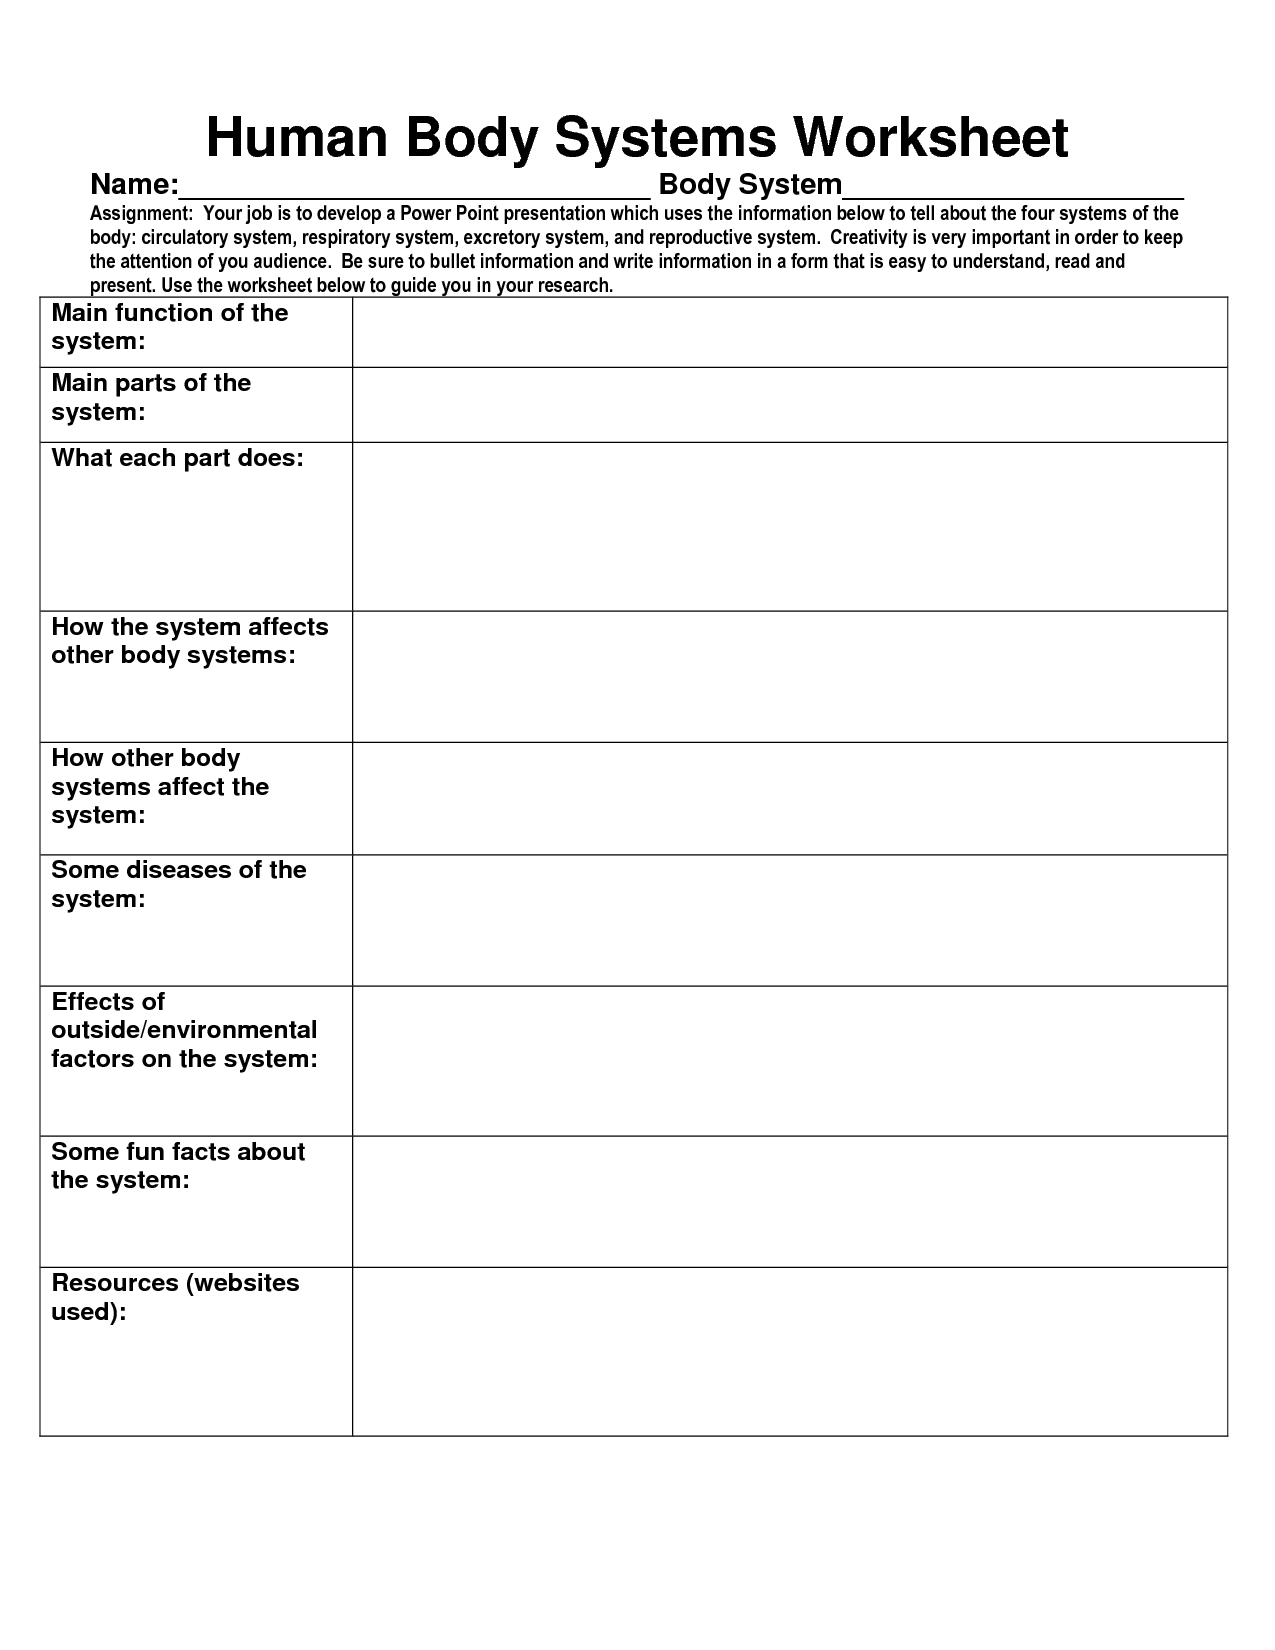 Human Body Systems Worksheets 5th Grade Image